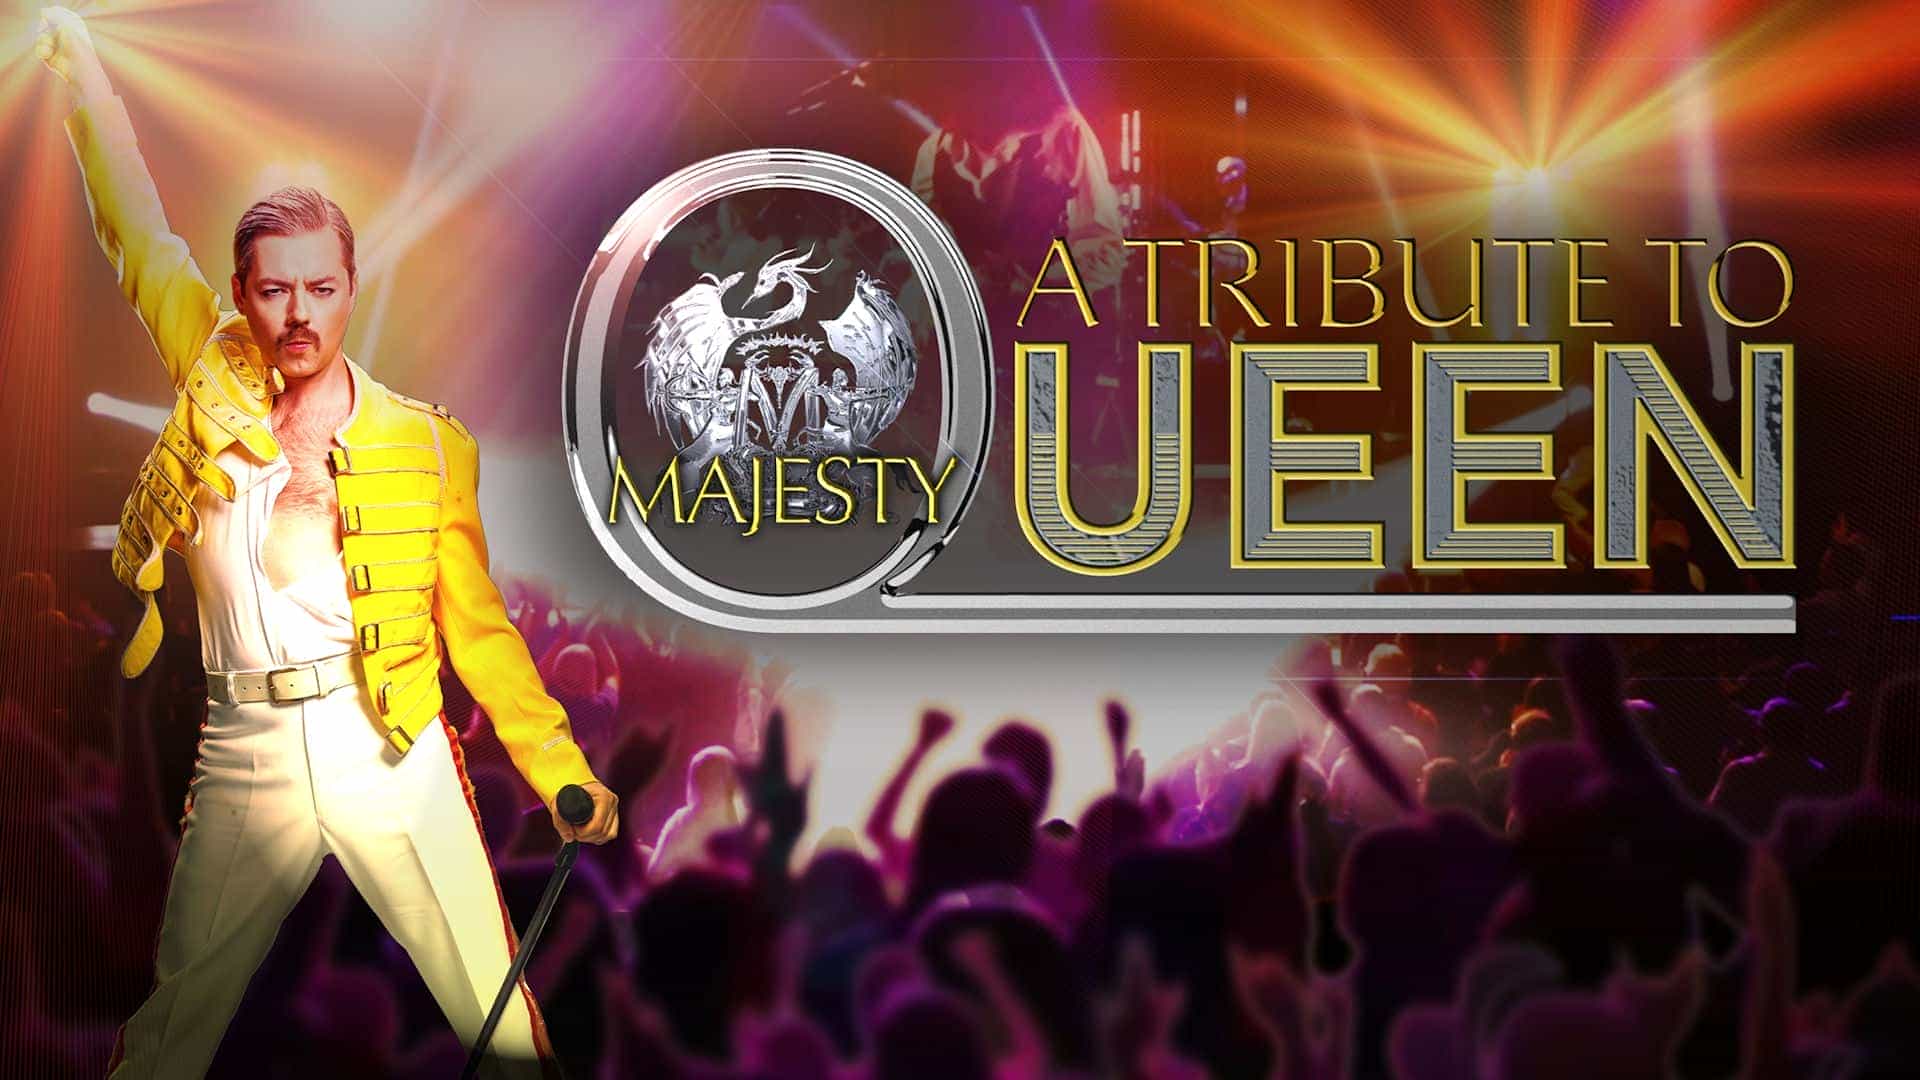 Majesty with Rob Lea - The Ultimate Queen Show